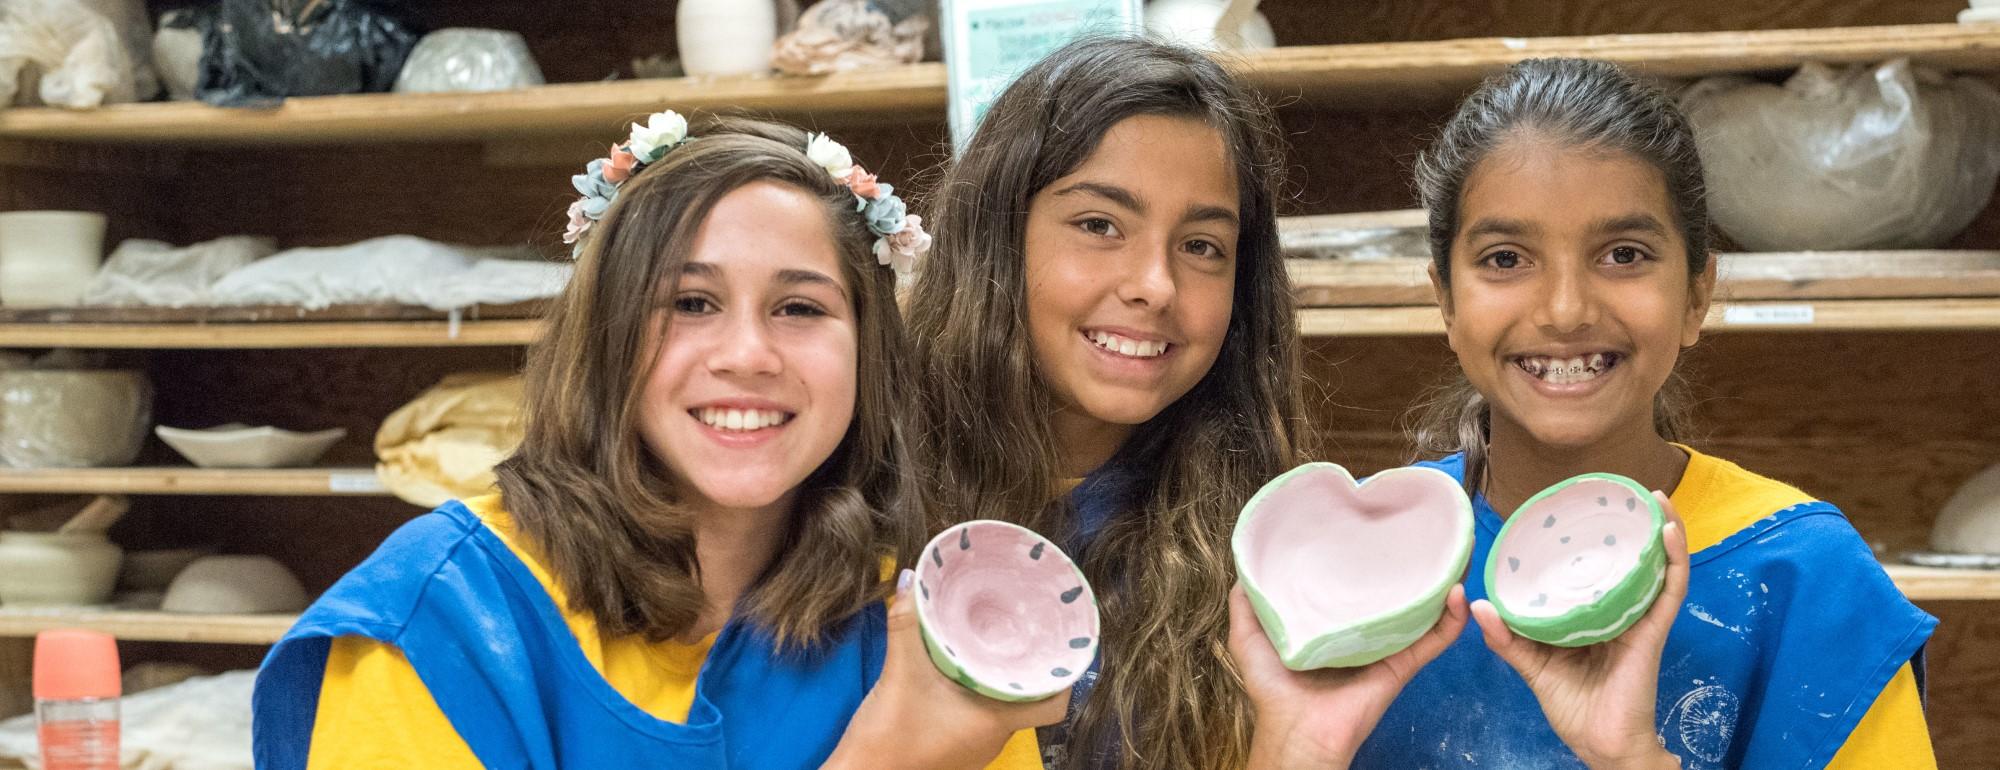 Girls sharing the bowls they made in a Youth Program class.